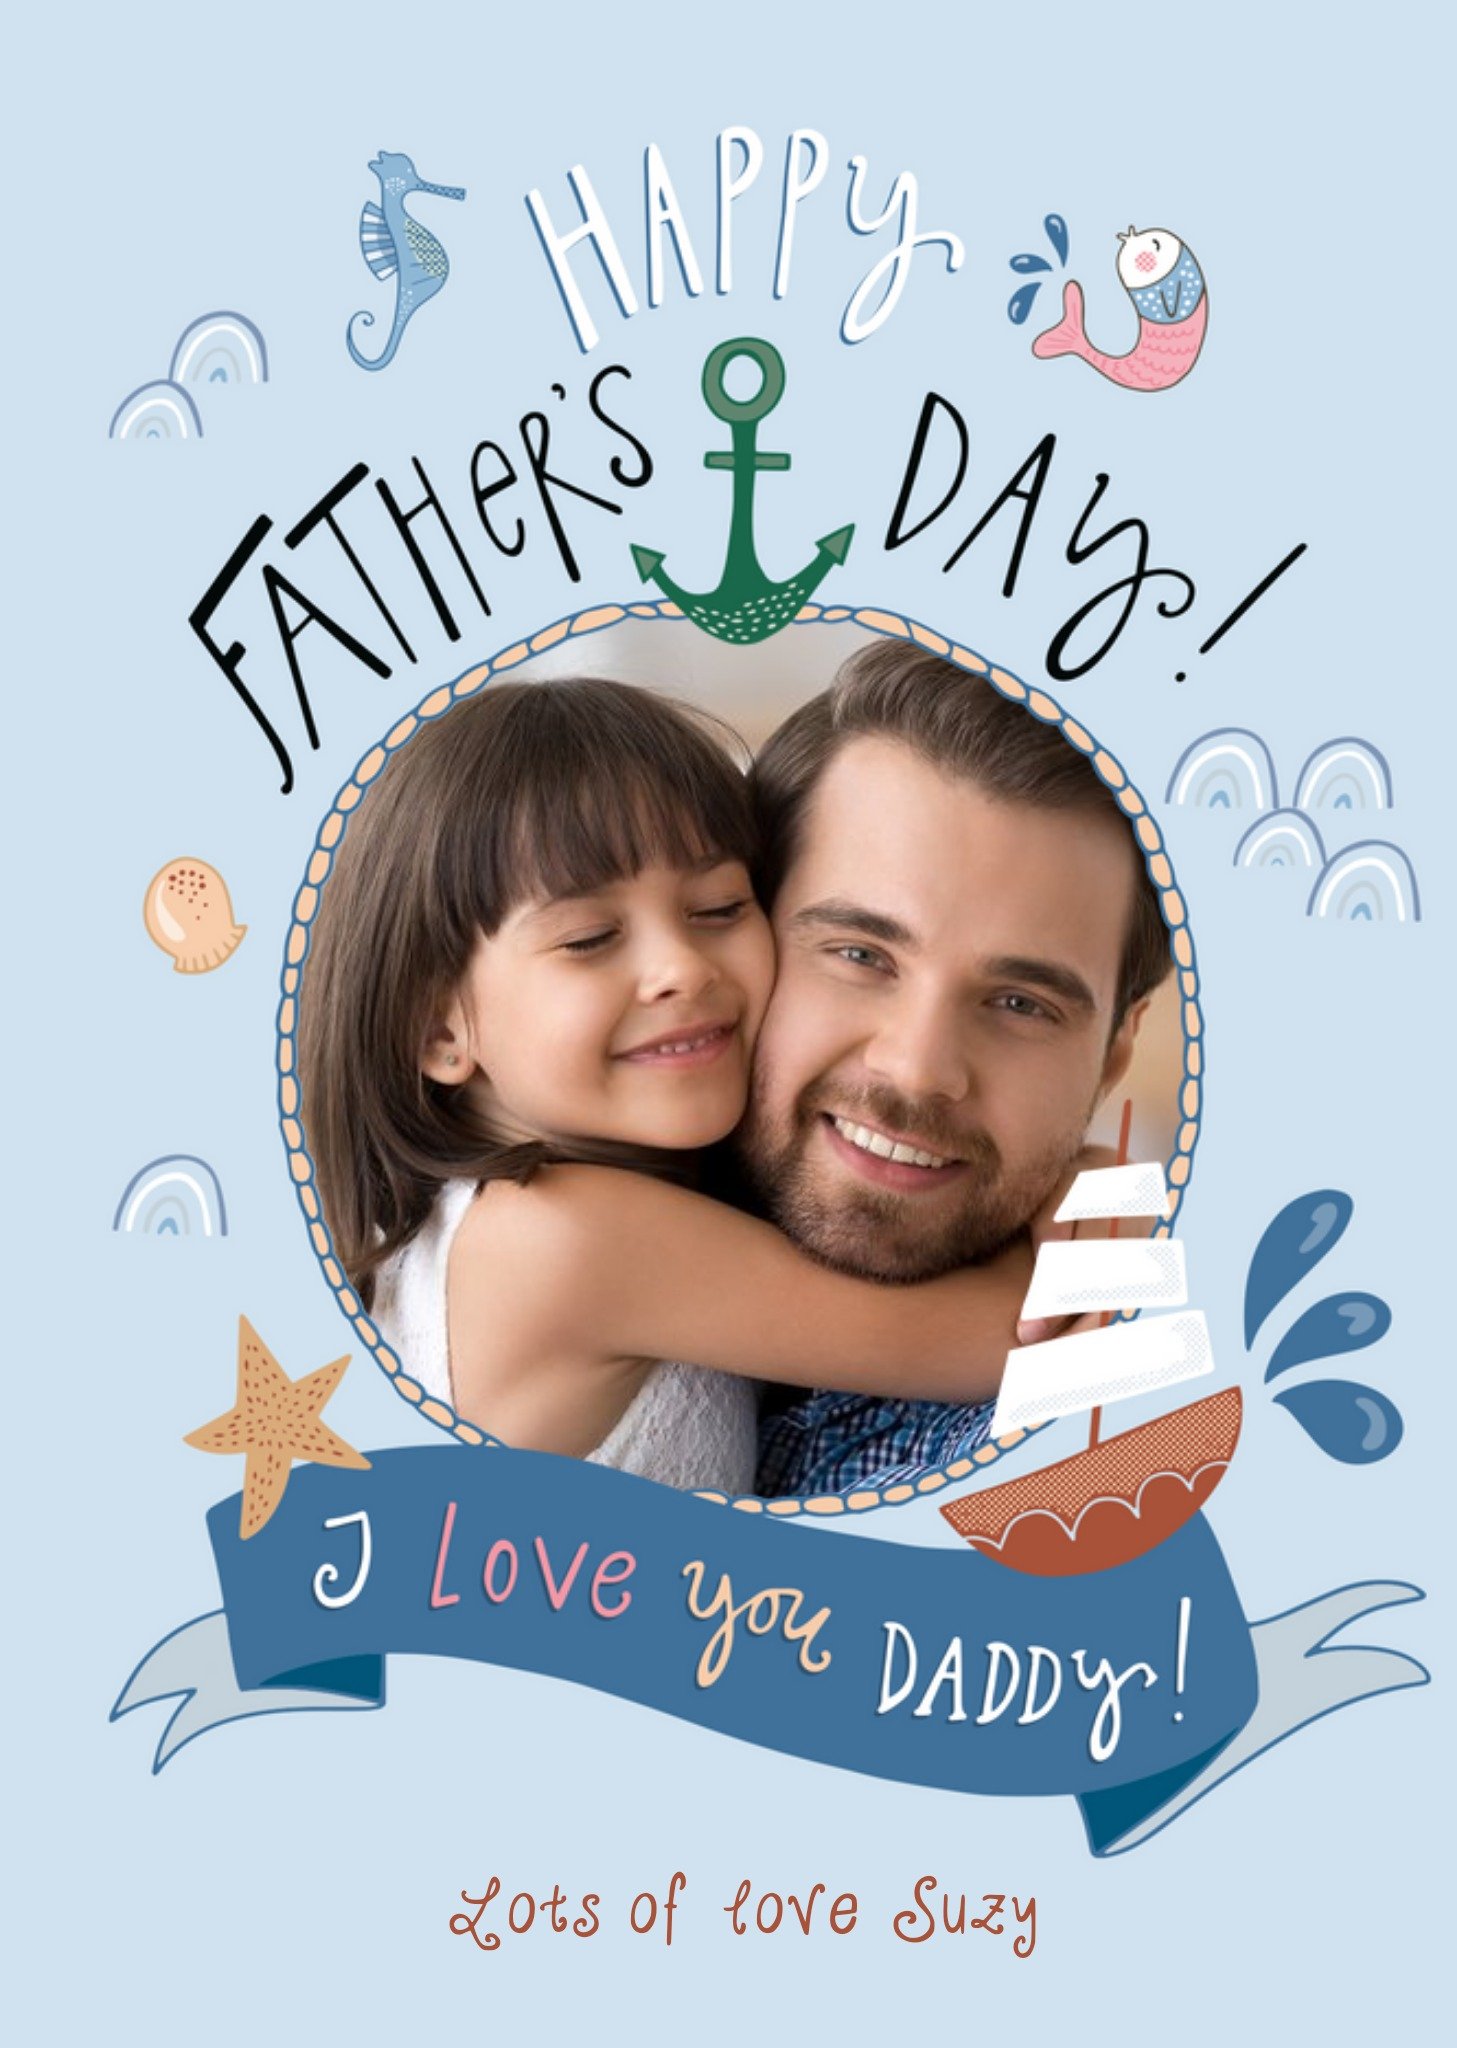 Moonpig Ocean Theme I Love You Daddy Photo Upload Father's Day Card Ecard